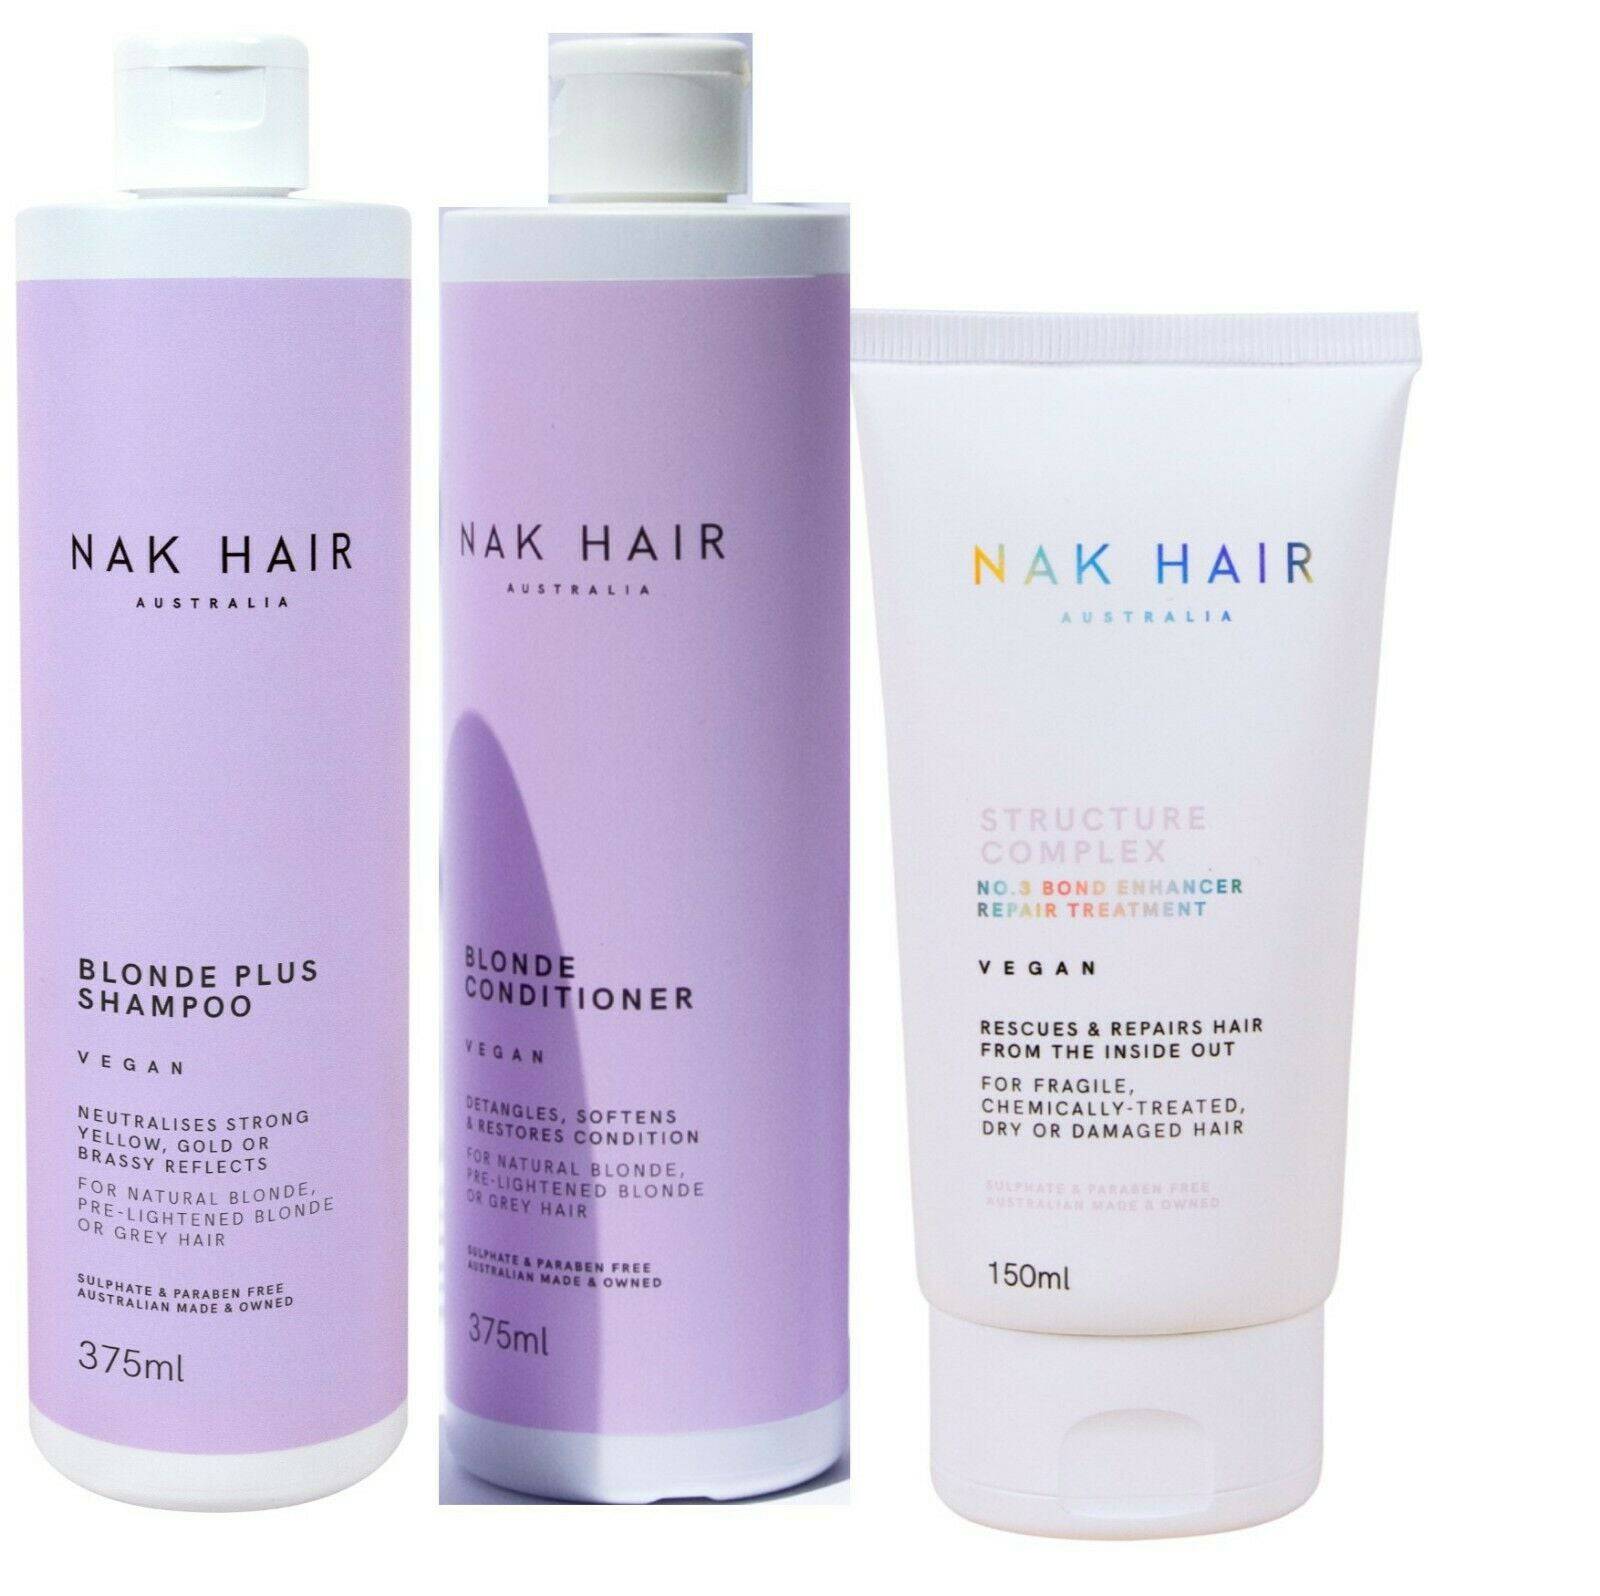 Nak Blonde Plus Shampoo Conditioner and Structure Complex Trio - On Line Hair Depot